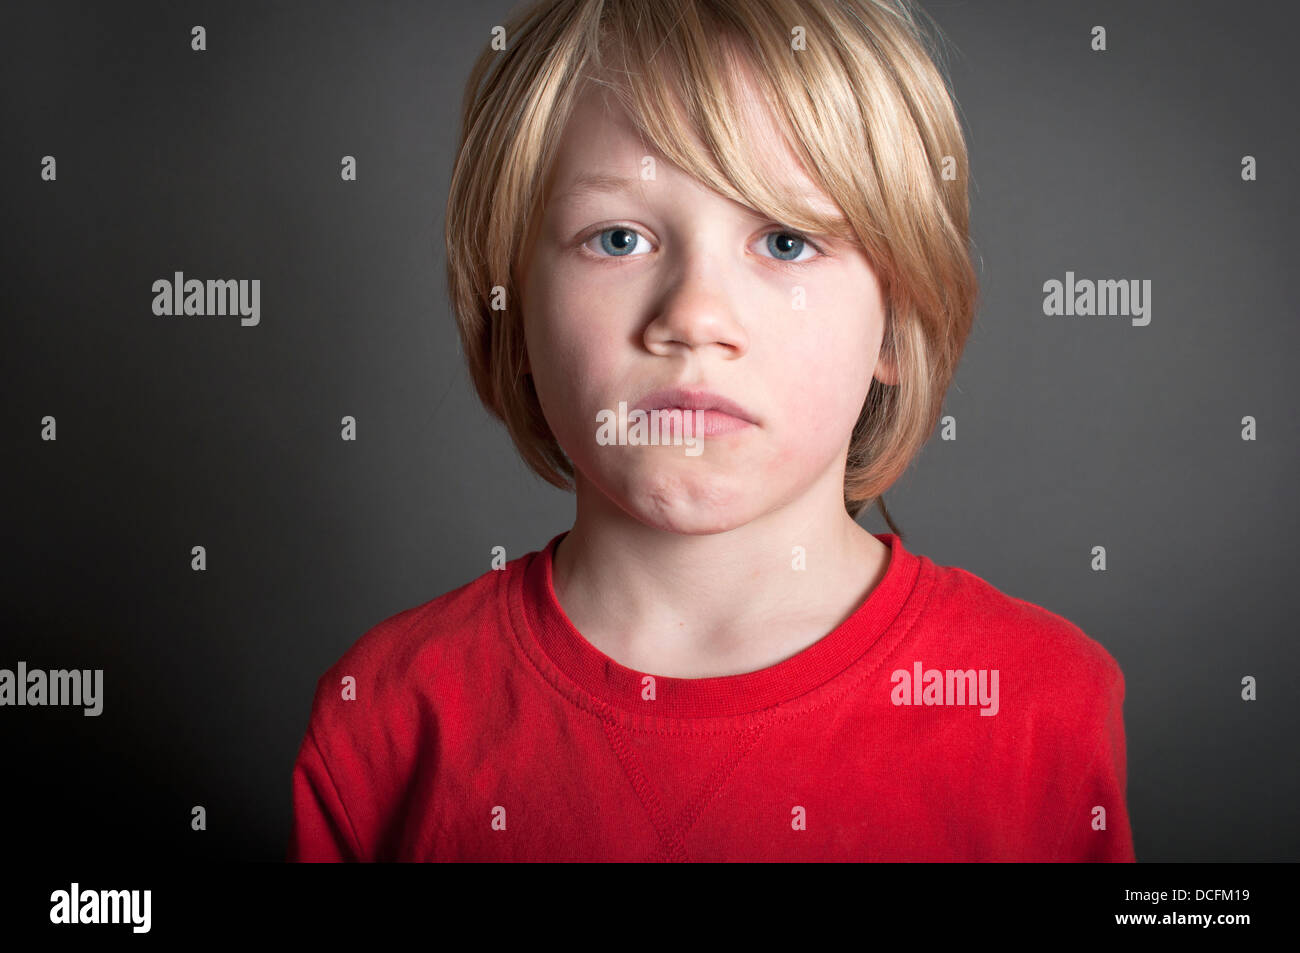 a scared lonely boy Stock Photo